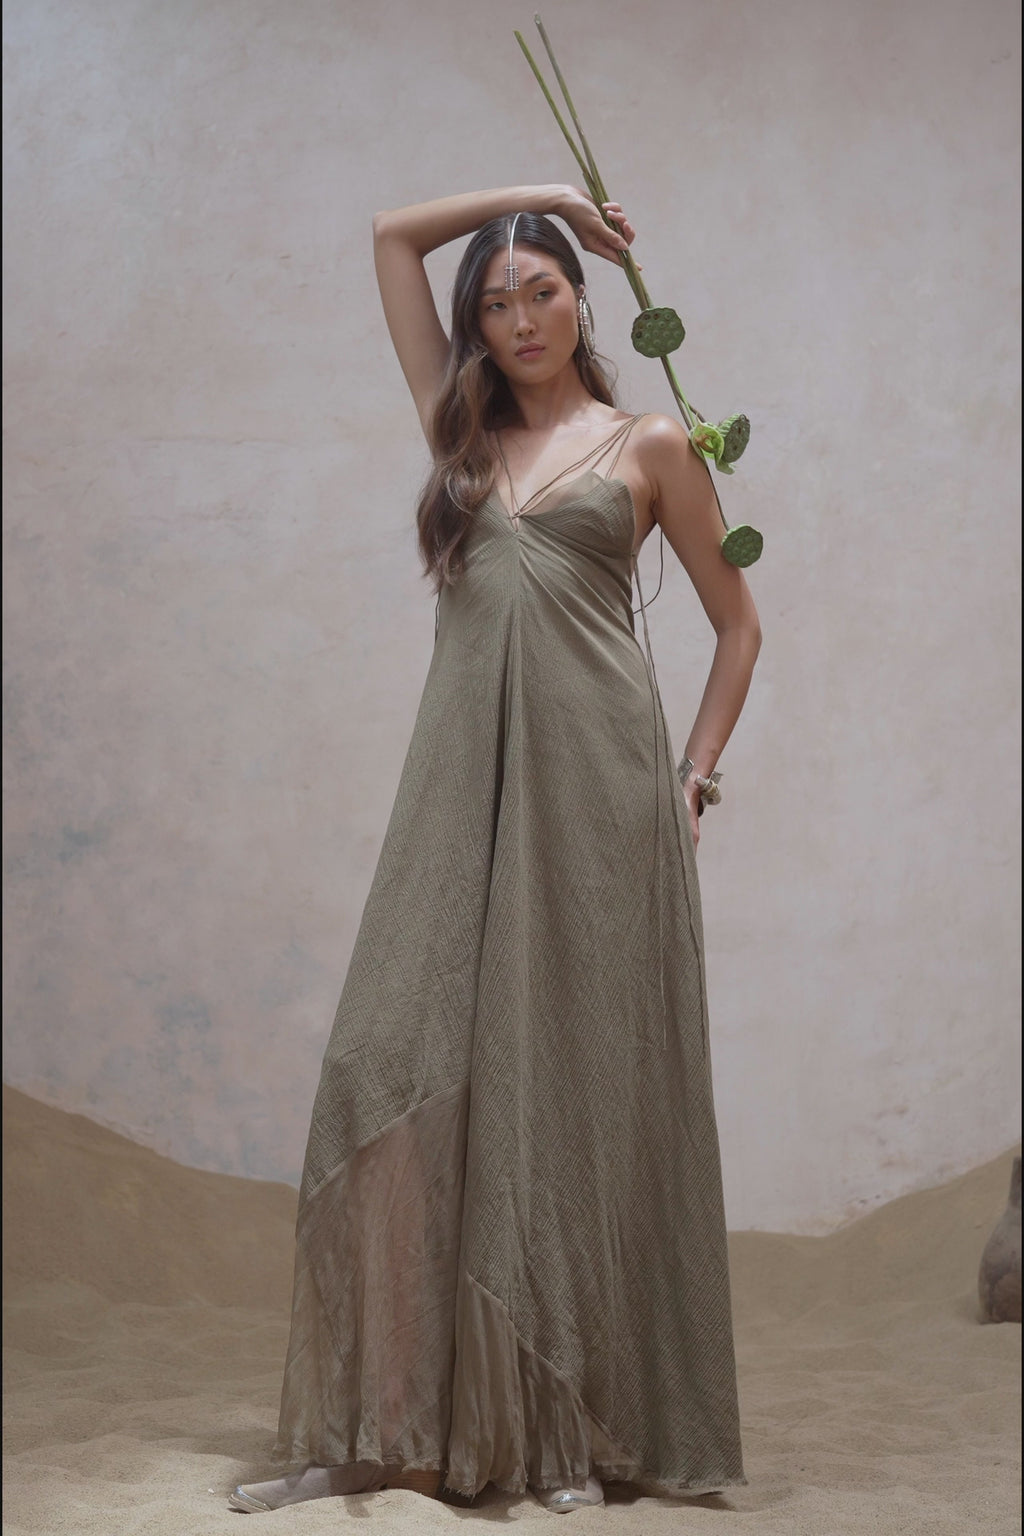 Get ready to shine with the Sage Green Goddess Dress from Aya Sacred Wear. Feel divine in this handmade dress and show off your inner goddess.